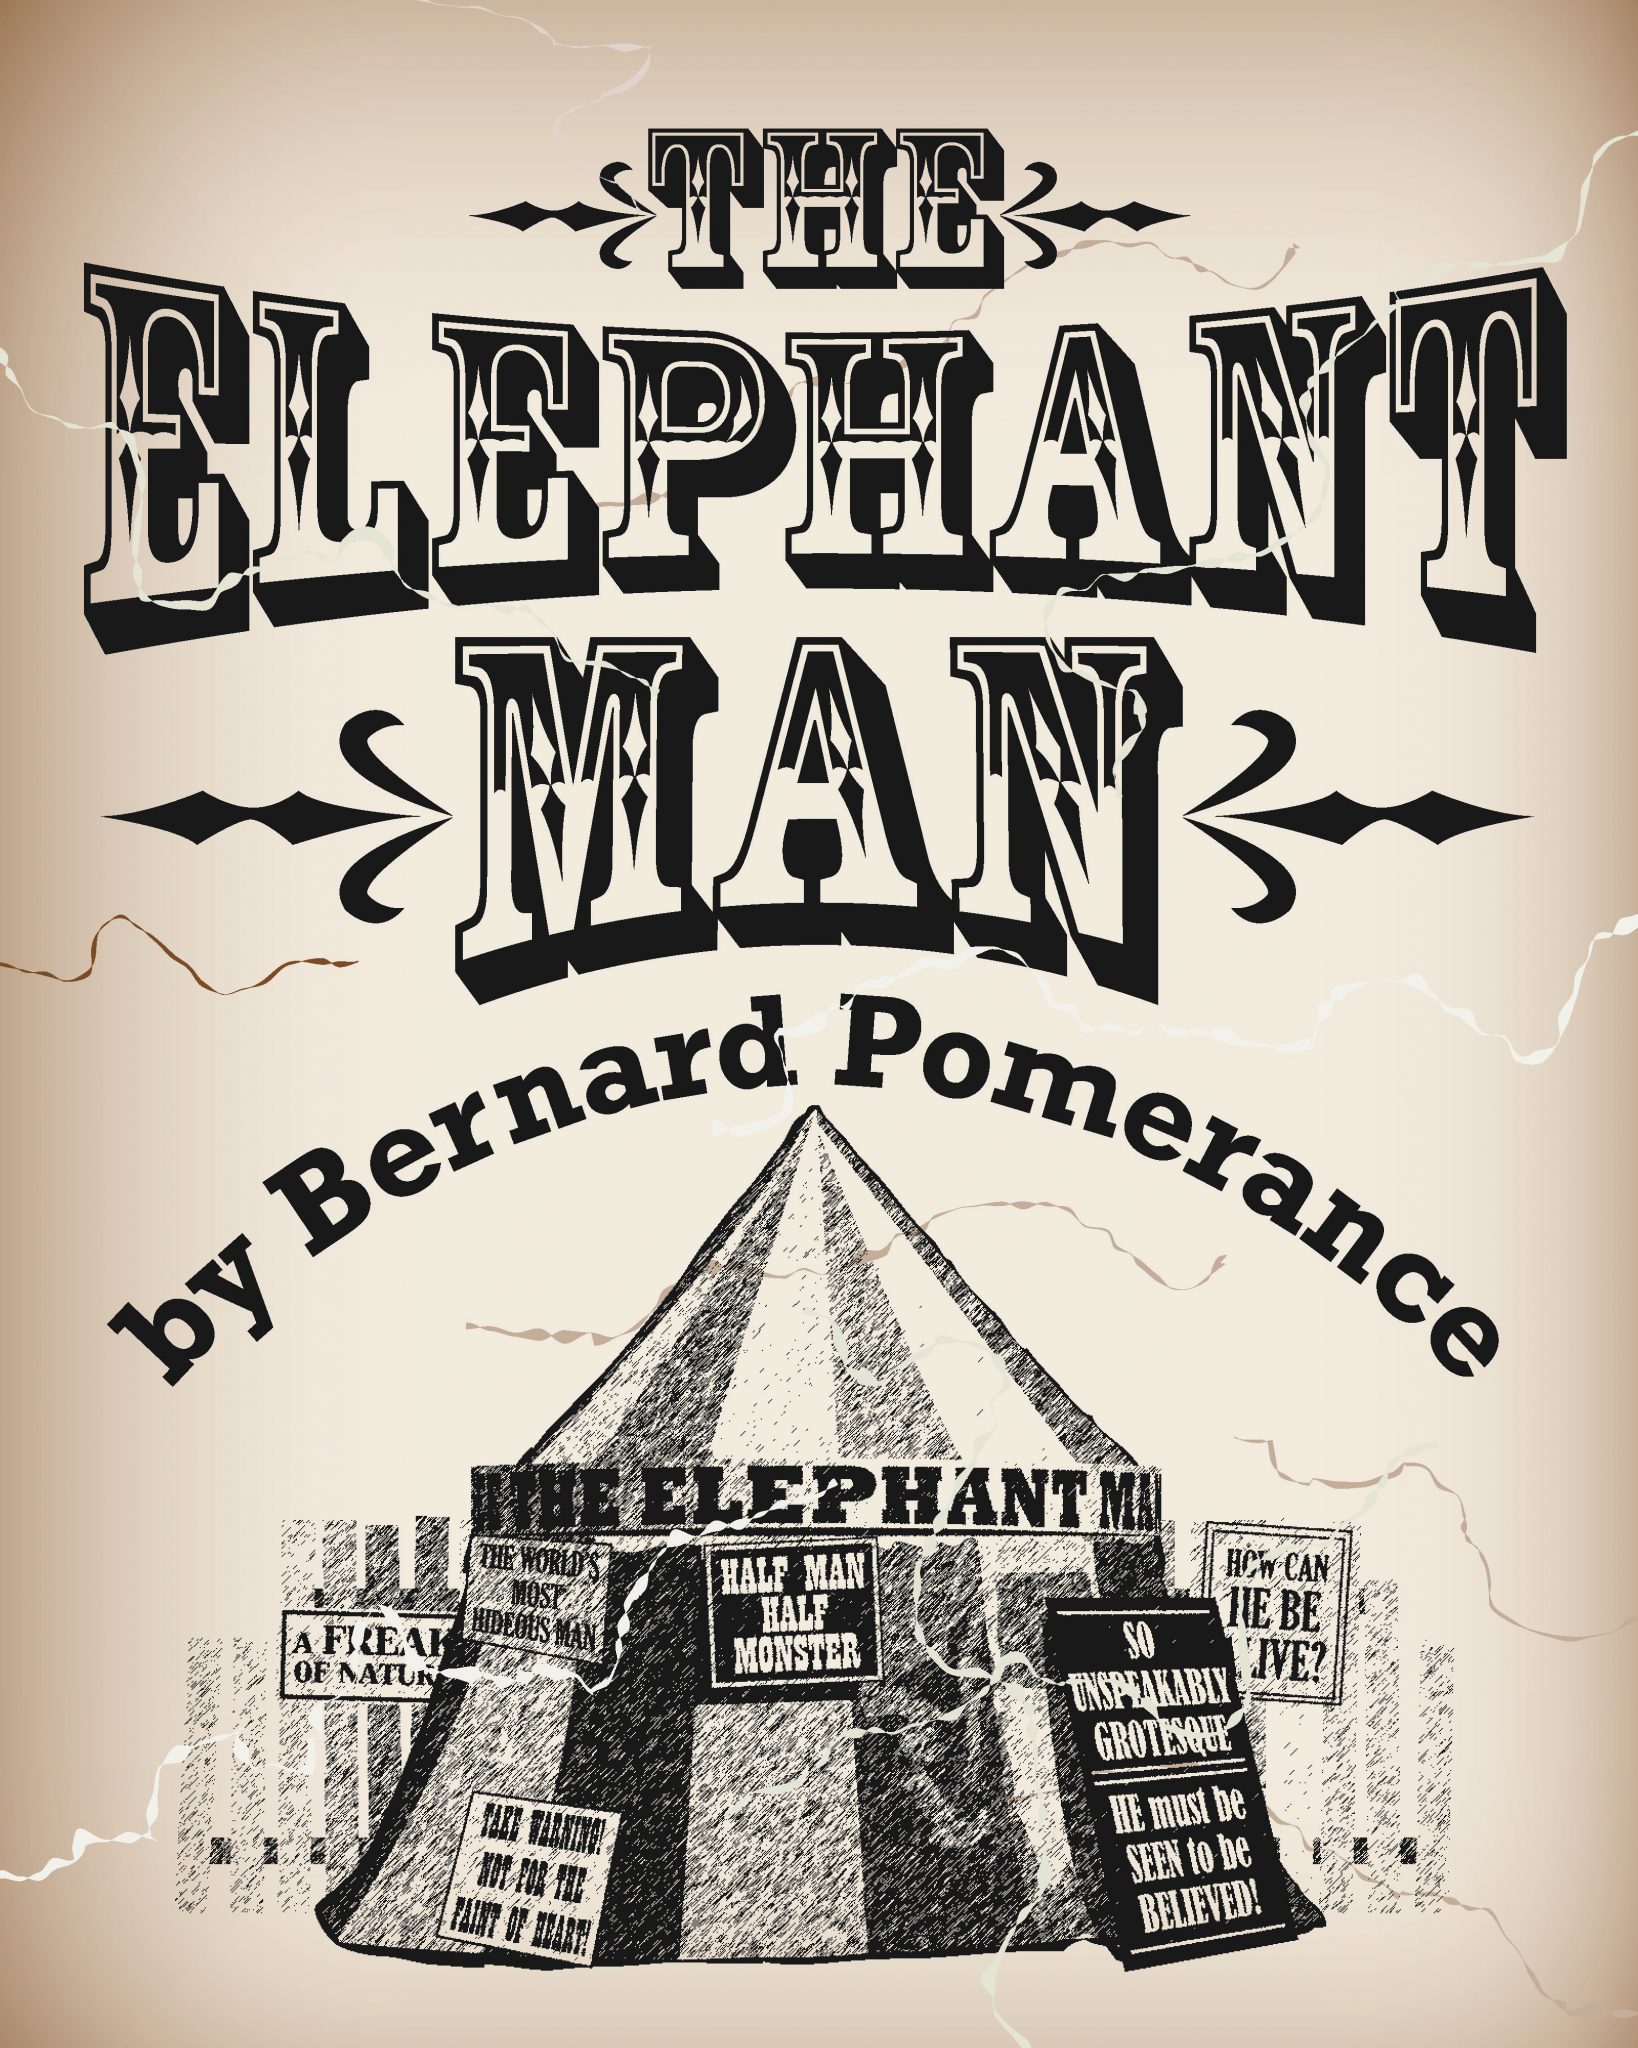 Open auditions for The Elephant Man